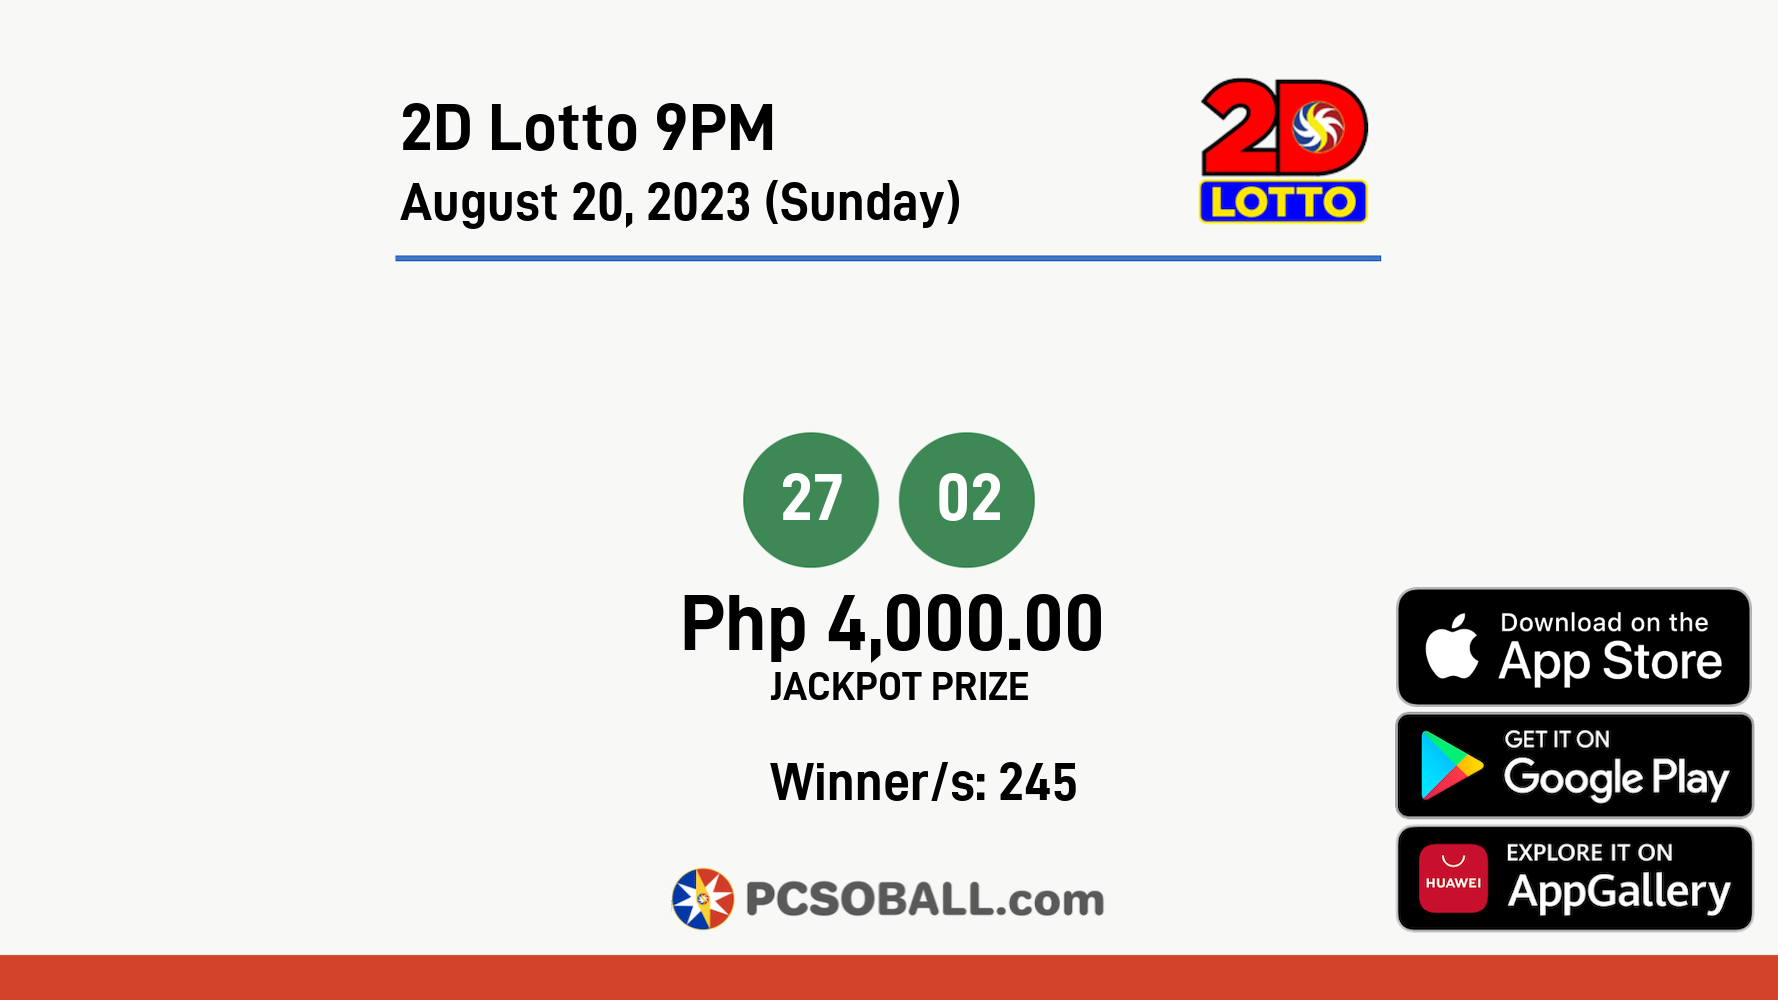 2D Lotto 9PM August 20, 2023 (Sunday) Result